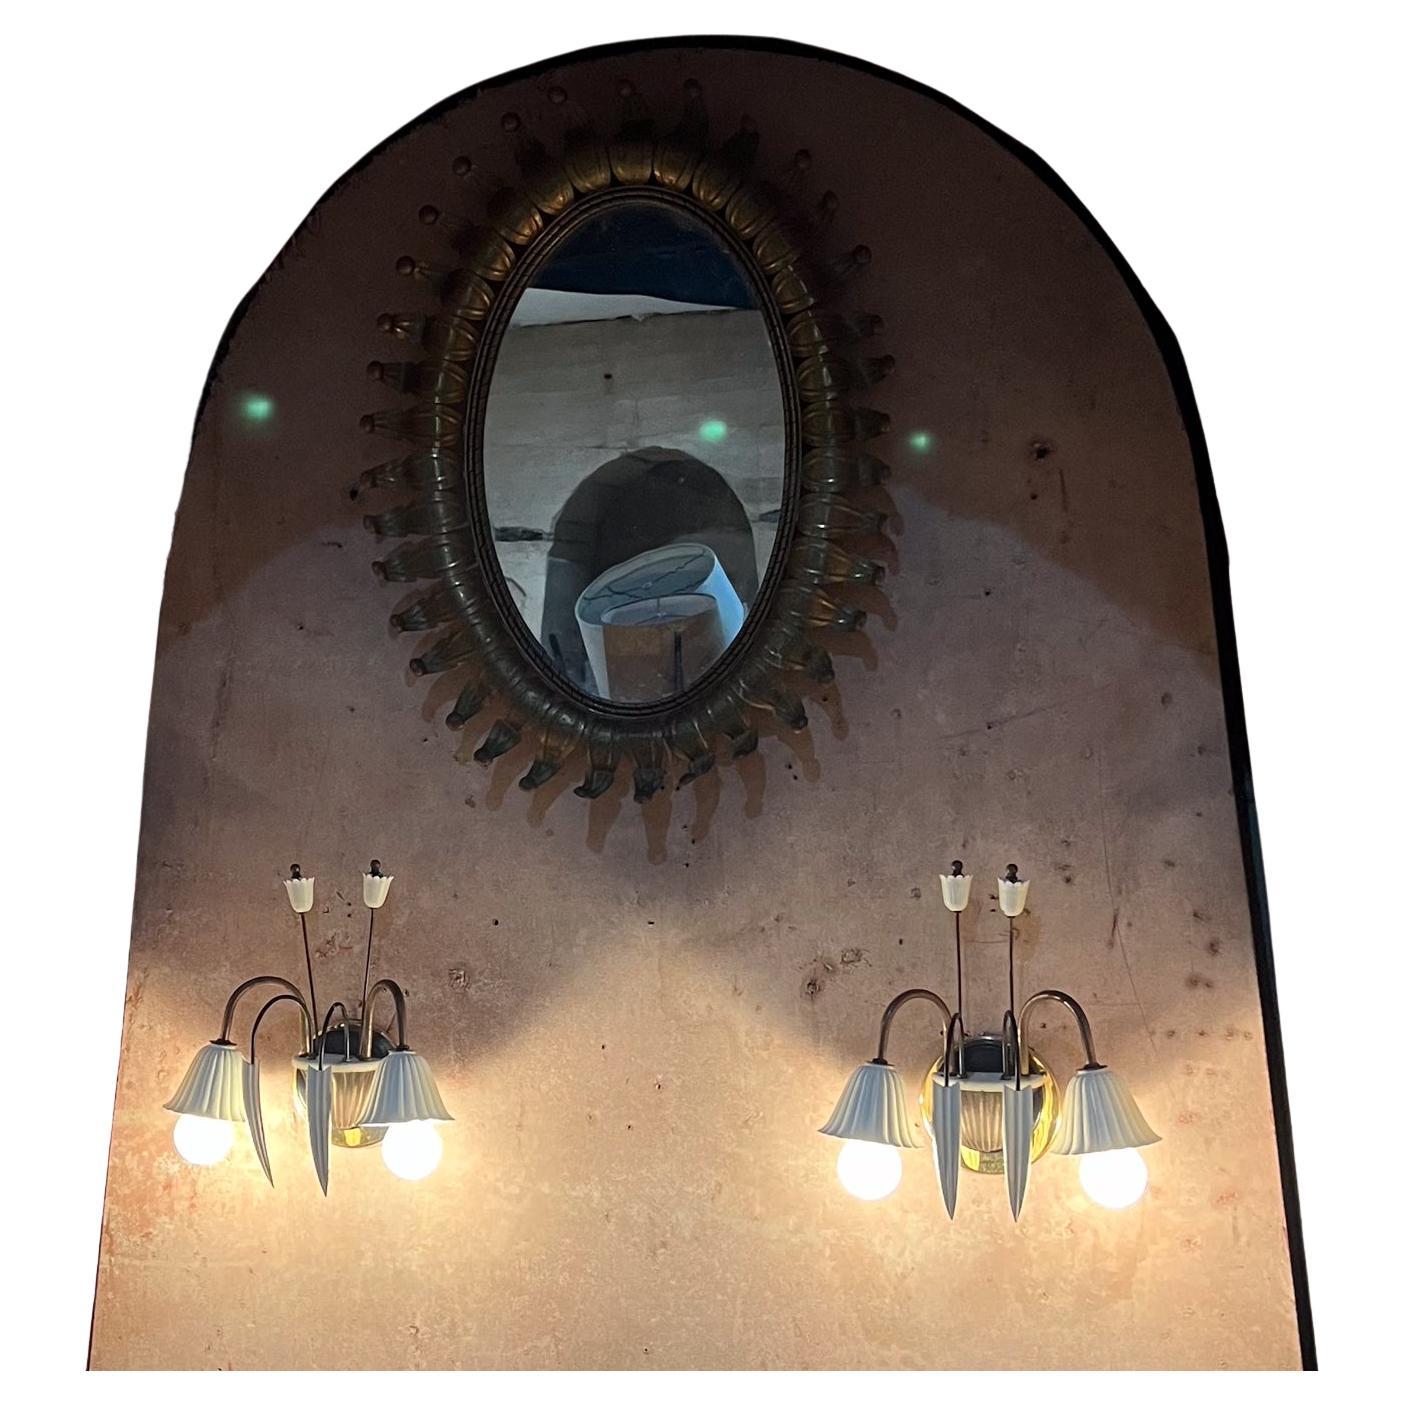 AMBIANIC presents
1950s Italian Flower Wall Sconces
Made in Italy.
Unmarked.
In the Style of Gio Ponti
Aluminum shades off white. Brass with vintage patina.
Each sconce requires two E-14 bulbs, 25 to 40 watts.
Bulbs not included
10.75 h x 10.5 w x